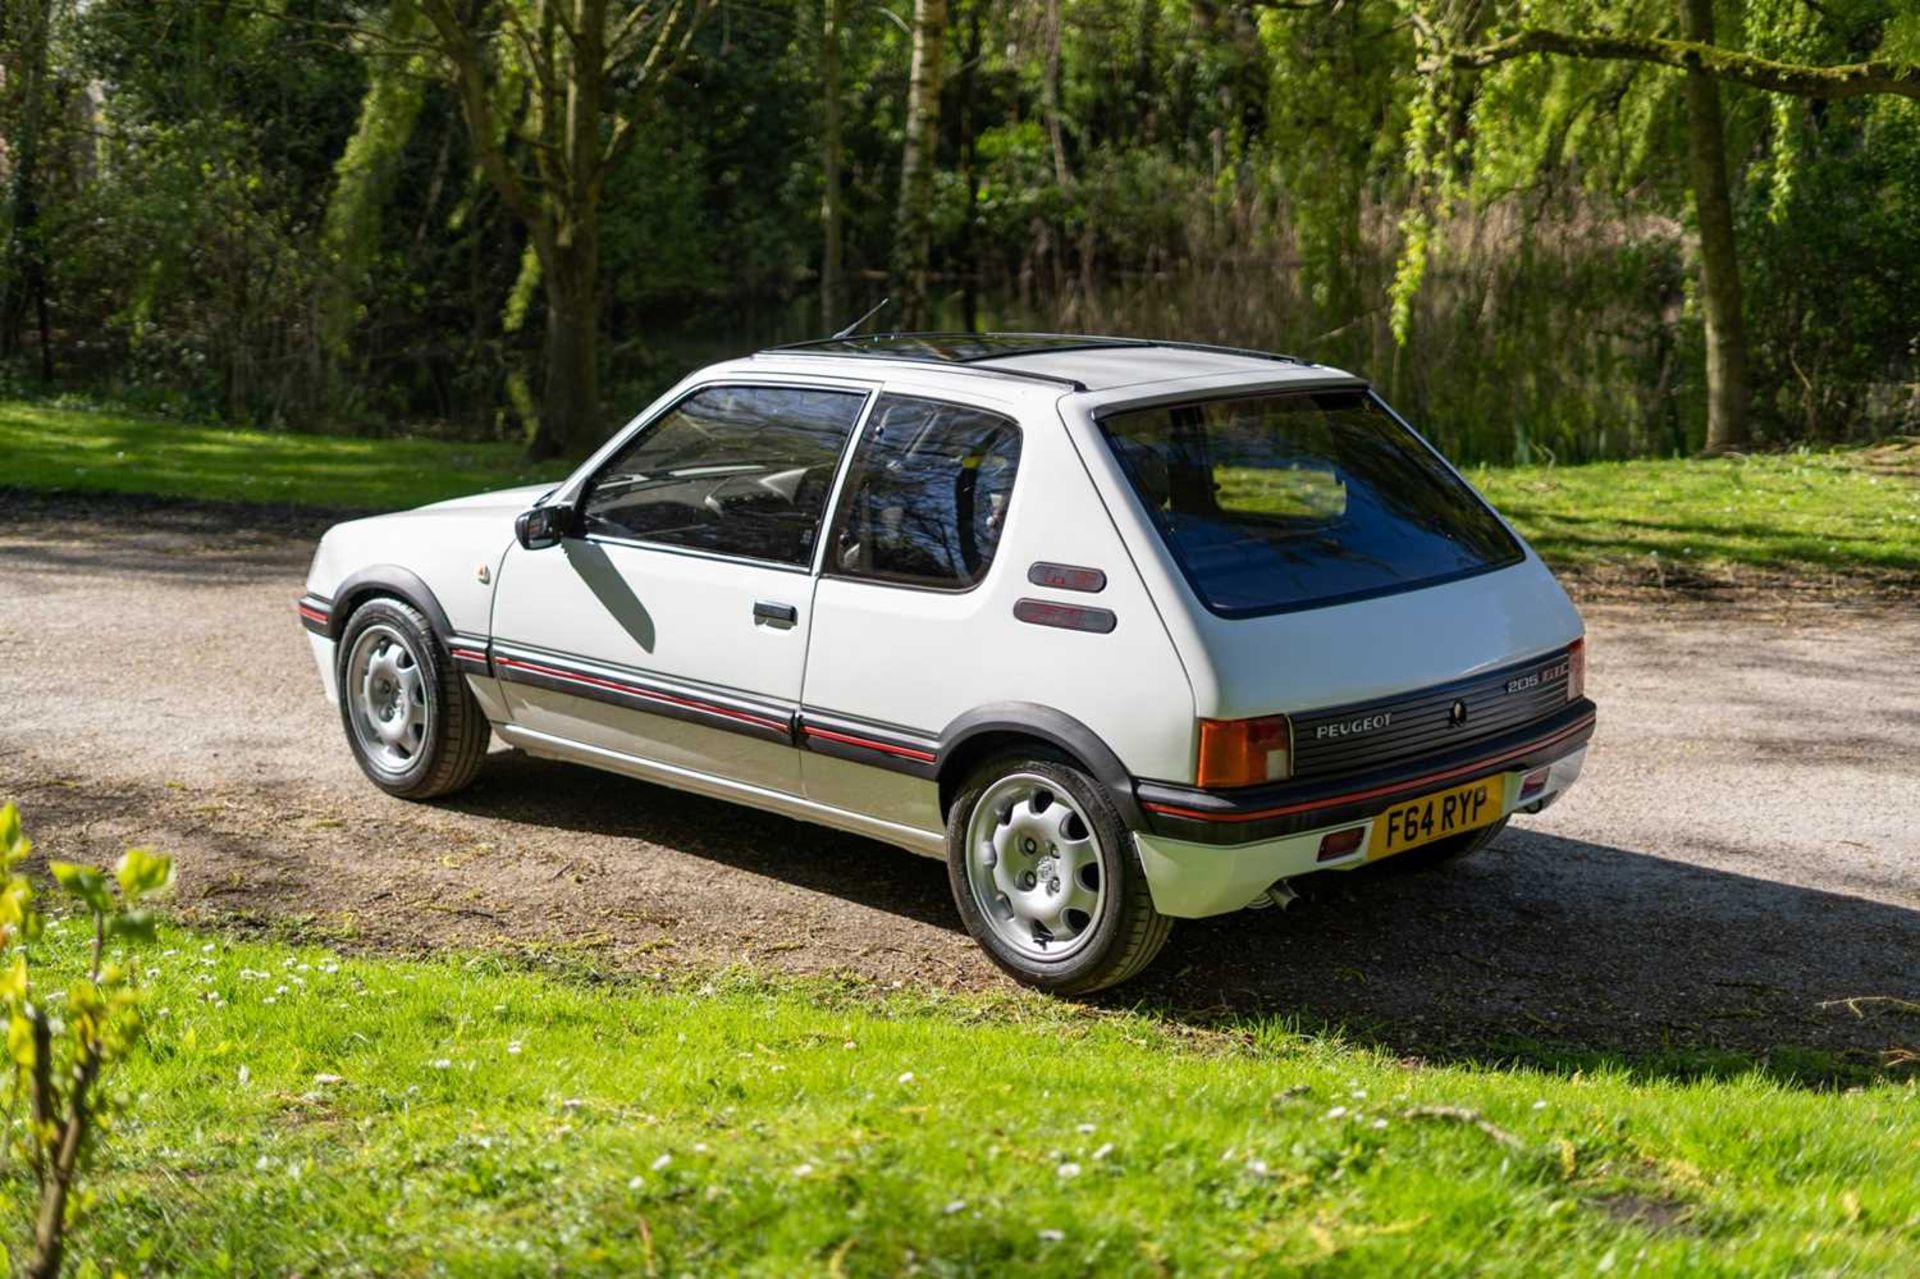 1989 Peugeot 205 GTi 1.6 The subject of much recent expenditure *** NO RESERVE *** - Image 5 of 59